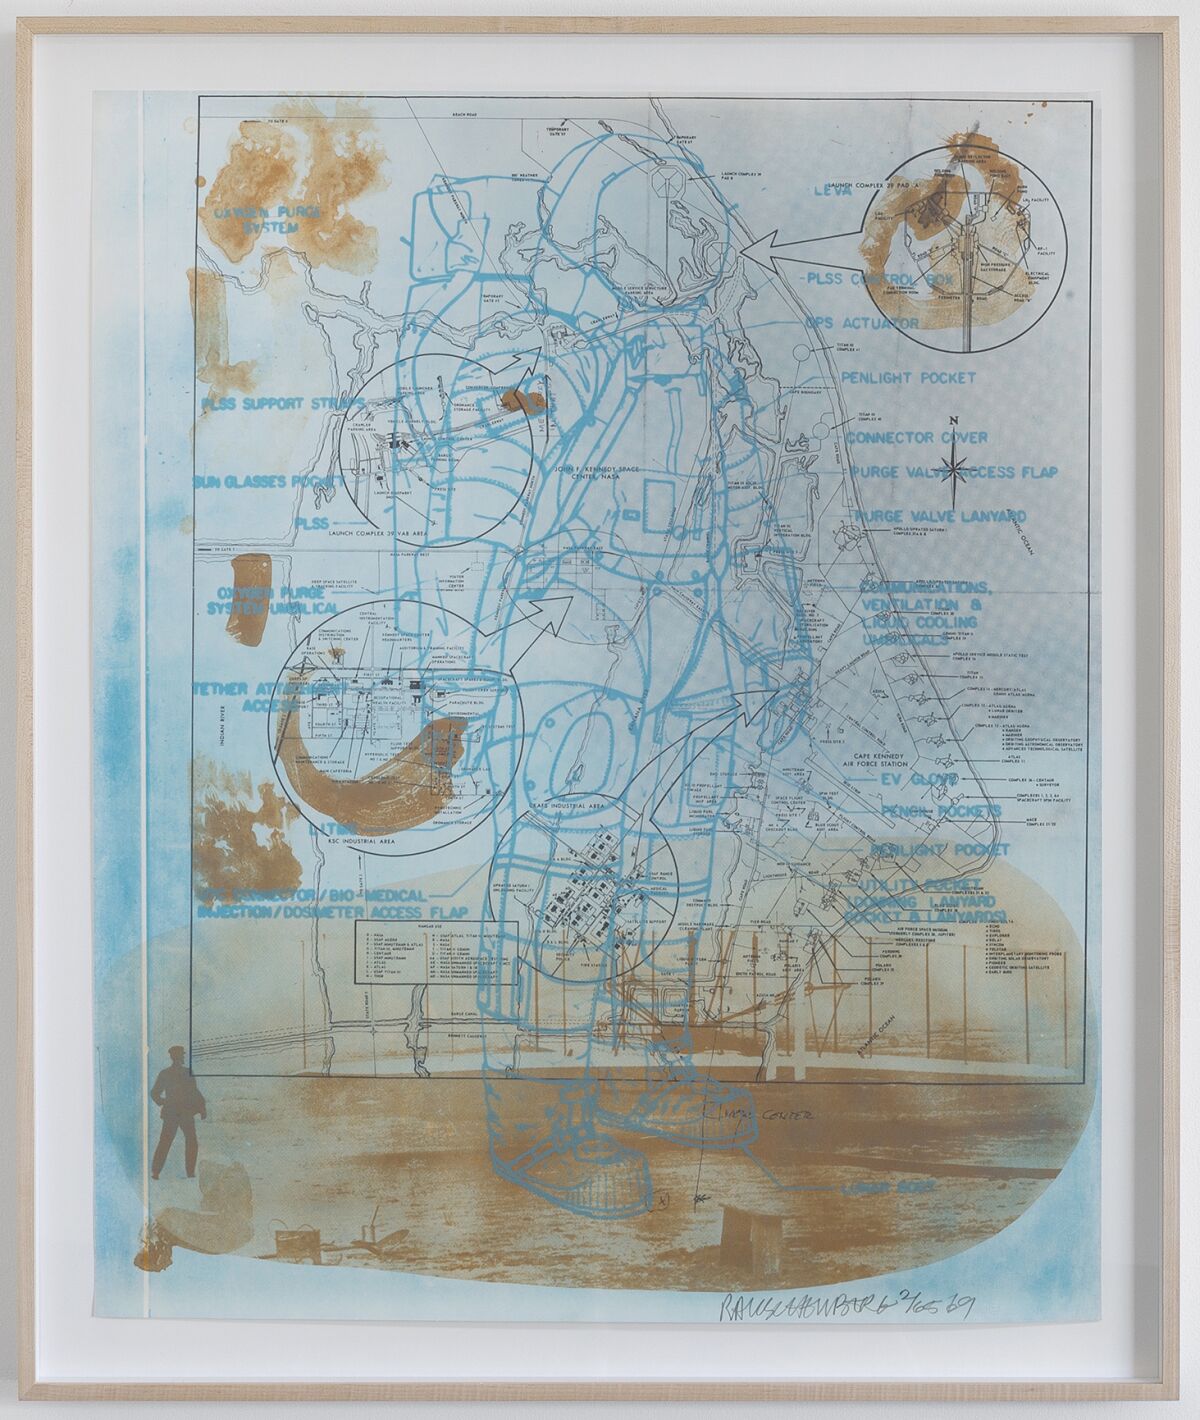 "Trust Zone," 1969, a three-color lithograph by Robert Rauschenberg, produced at Gemini G.E.L.